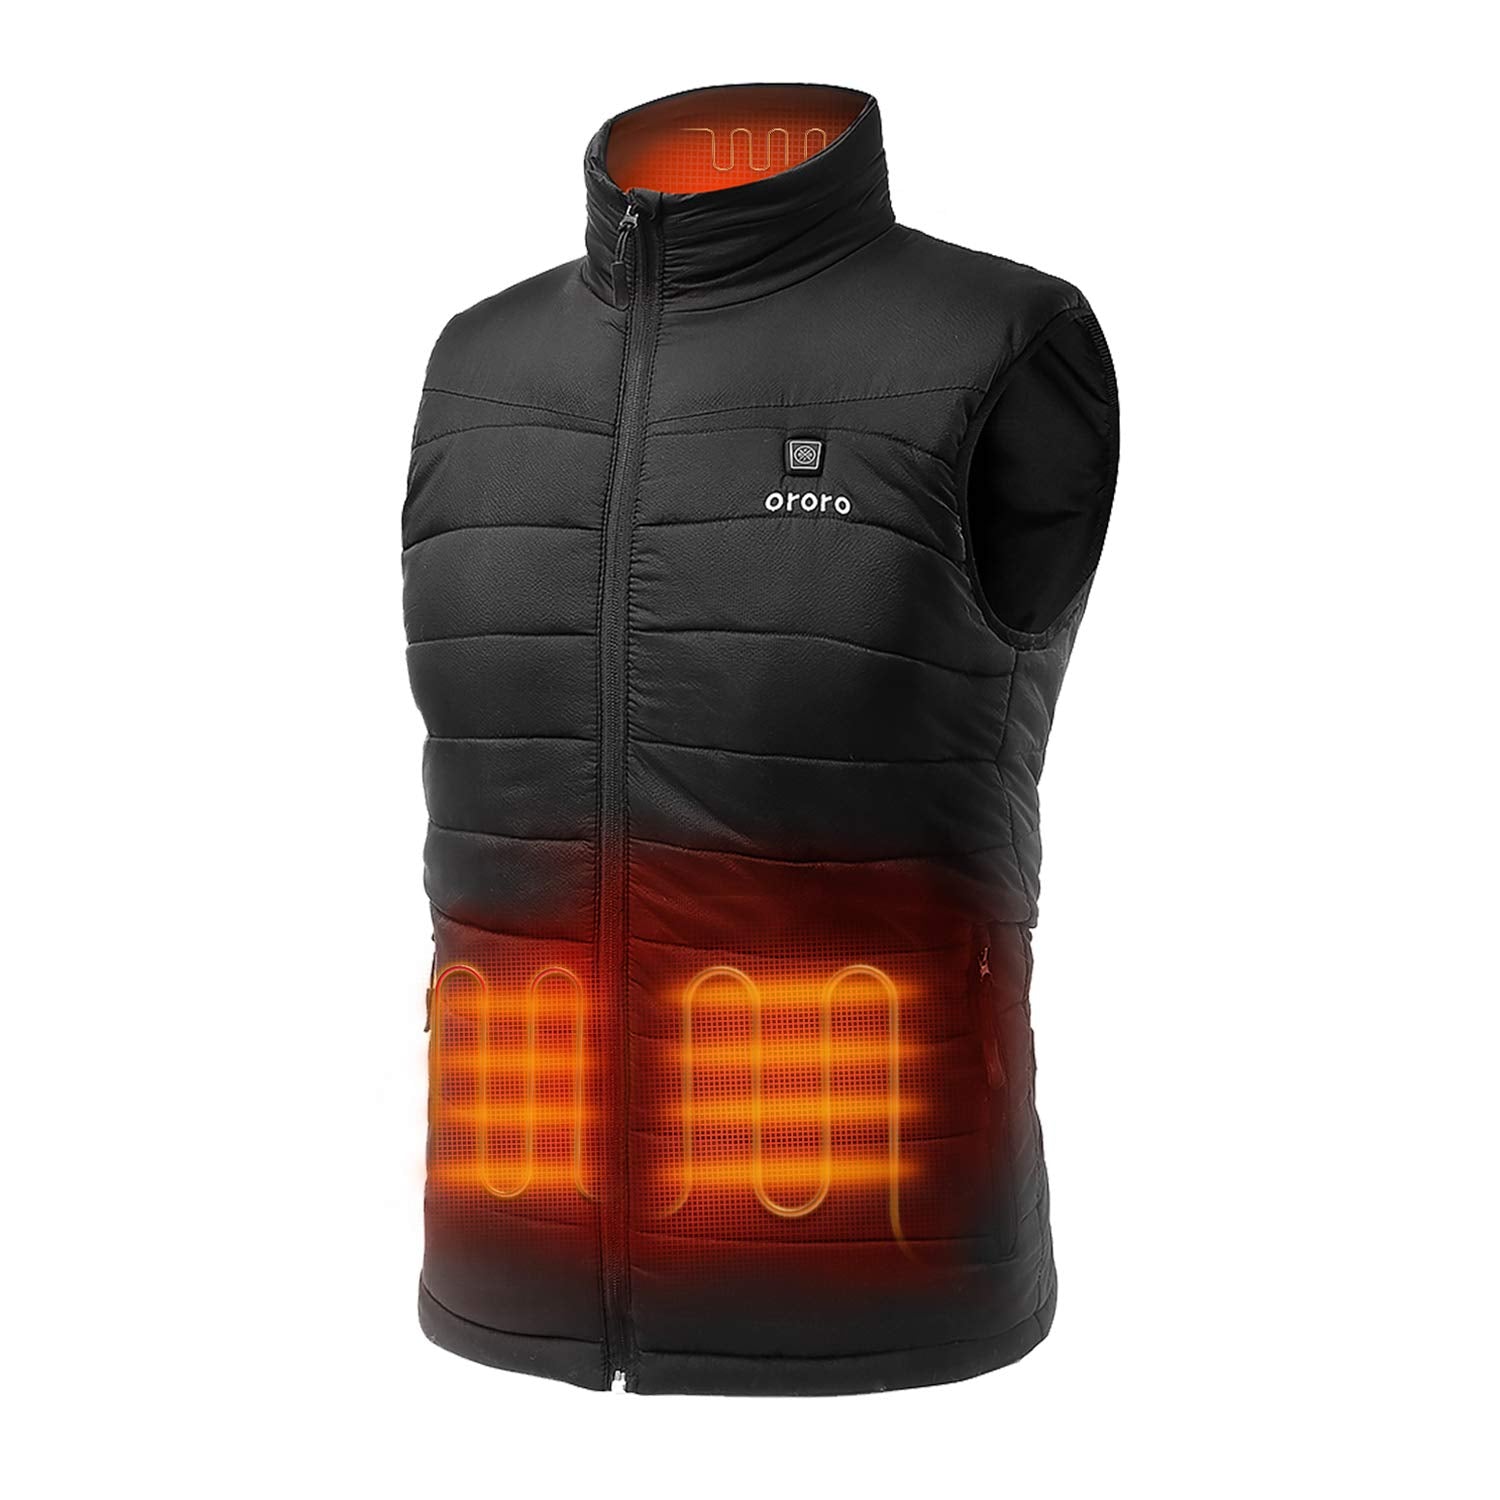 ORORO Men's Lightweight Heated Vest with Battery Pack - Large - Black